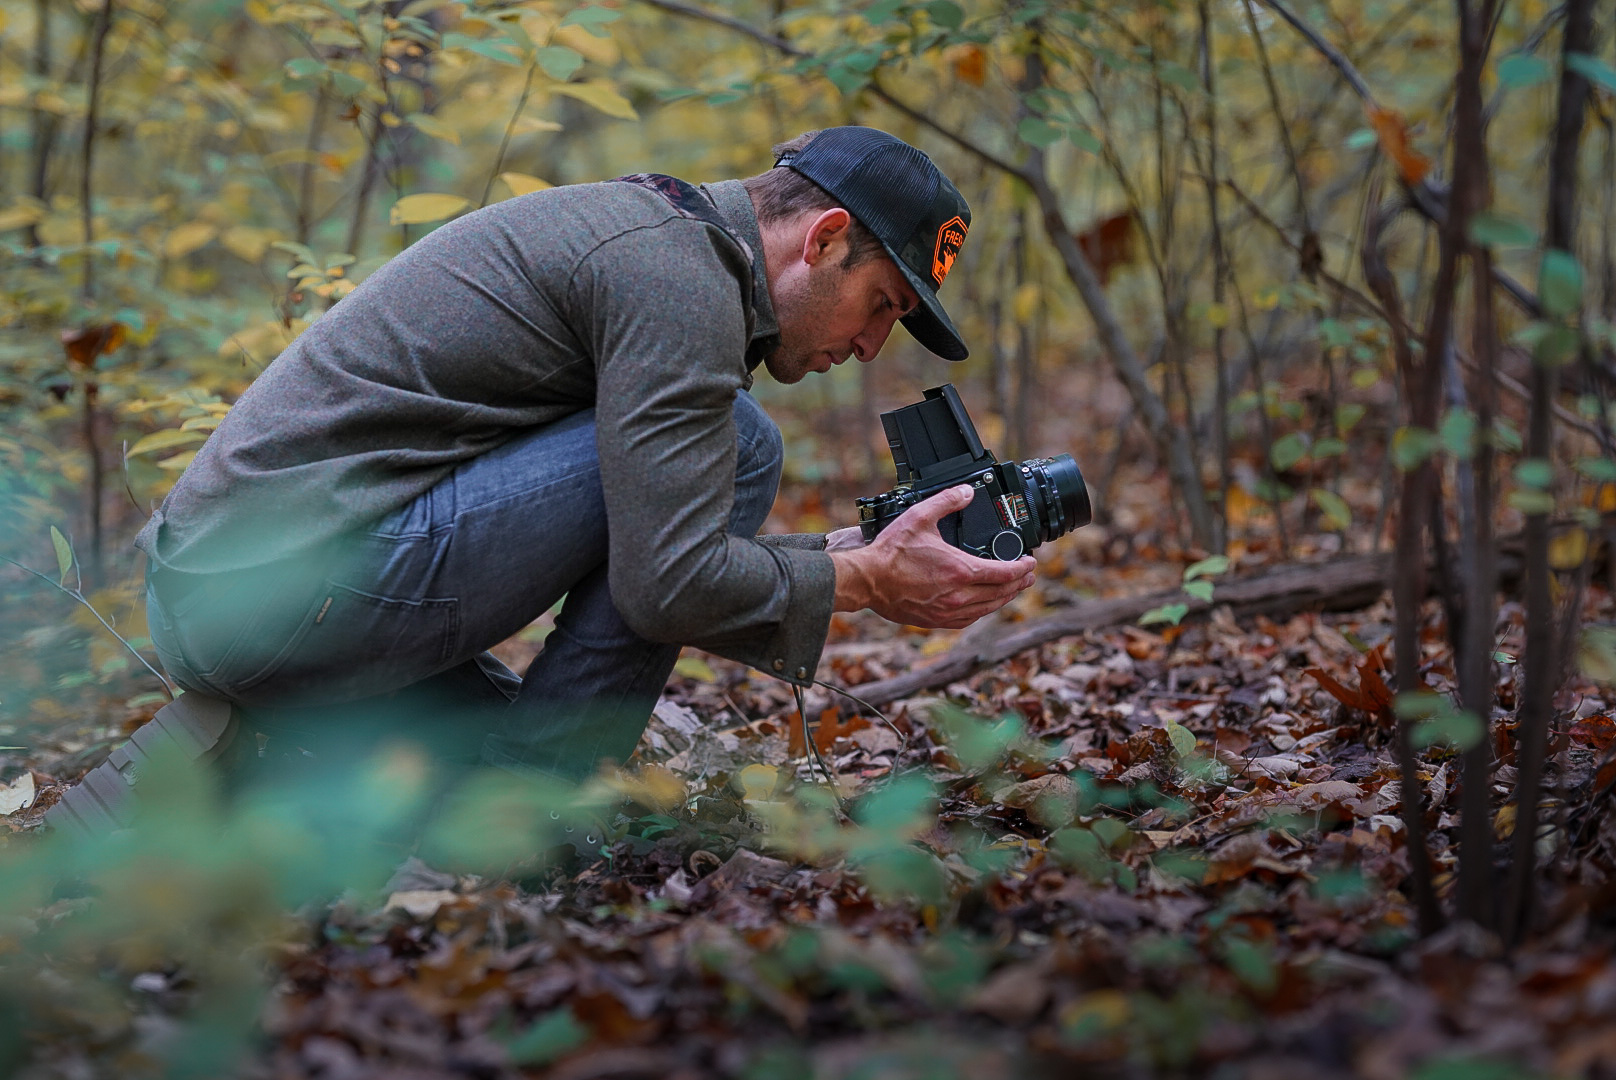 Film photography in the forrest with Daniel Mekis using a Mamiya RB67 camera